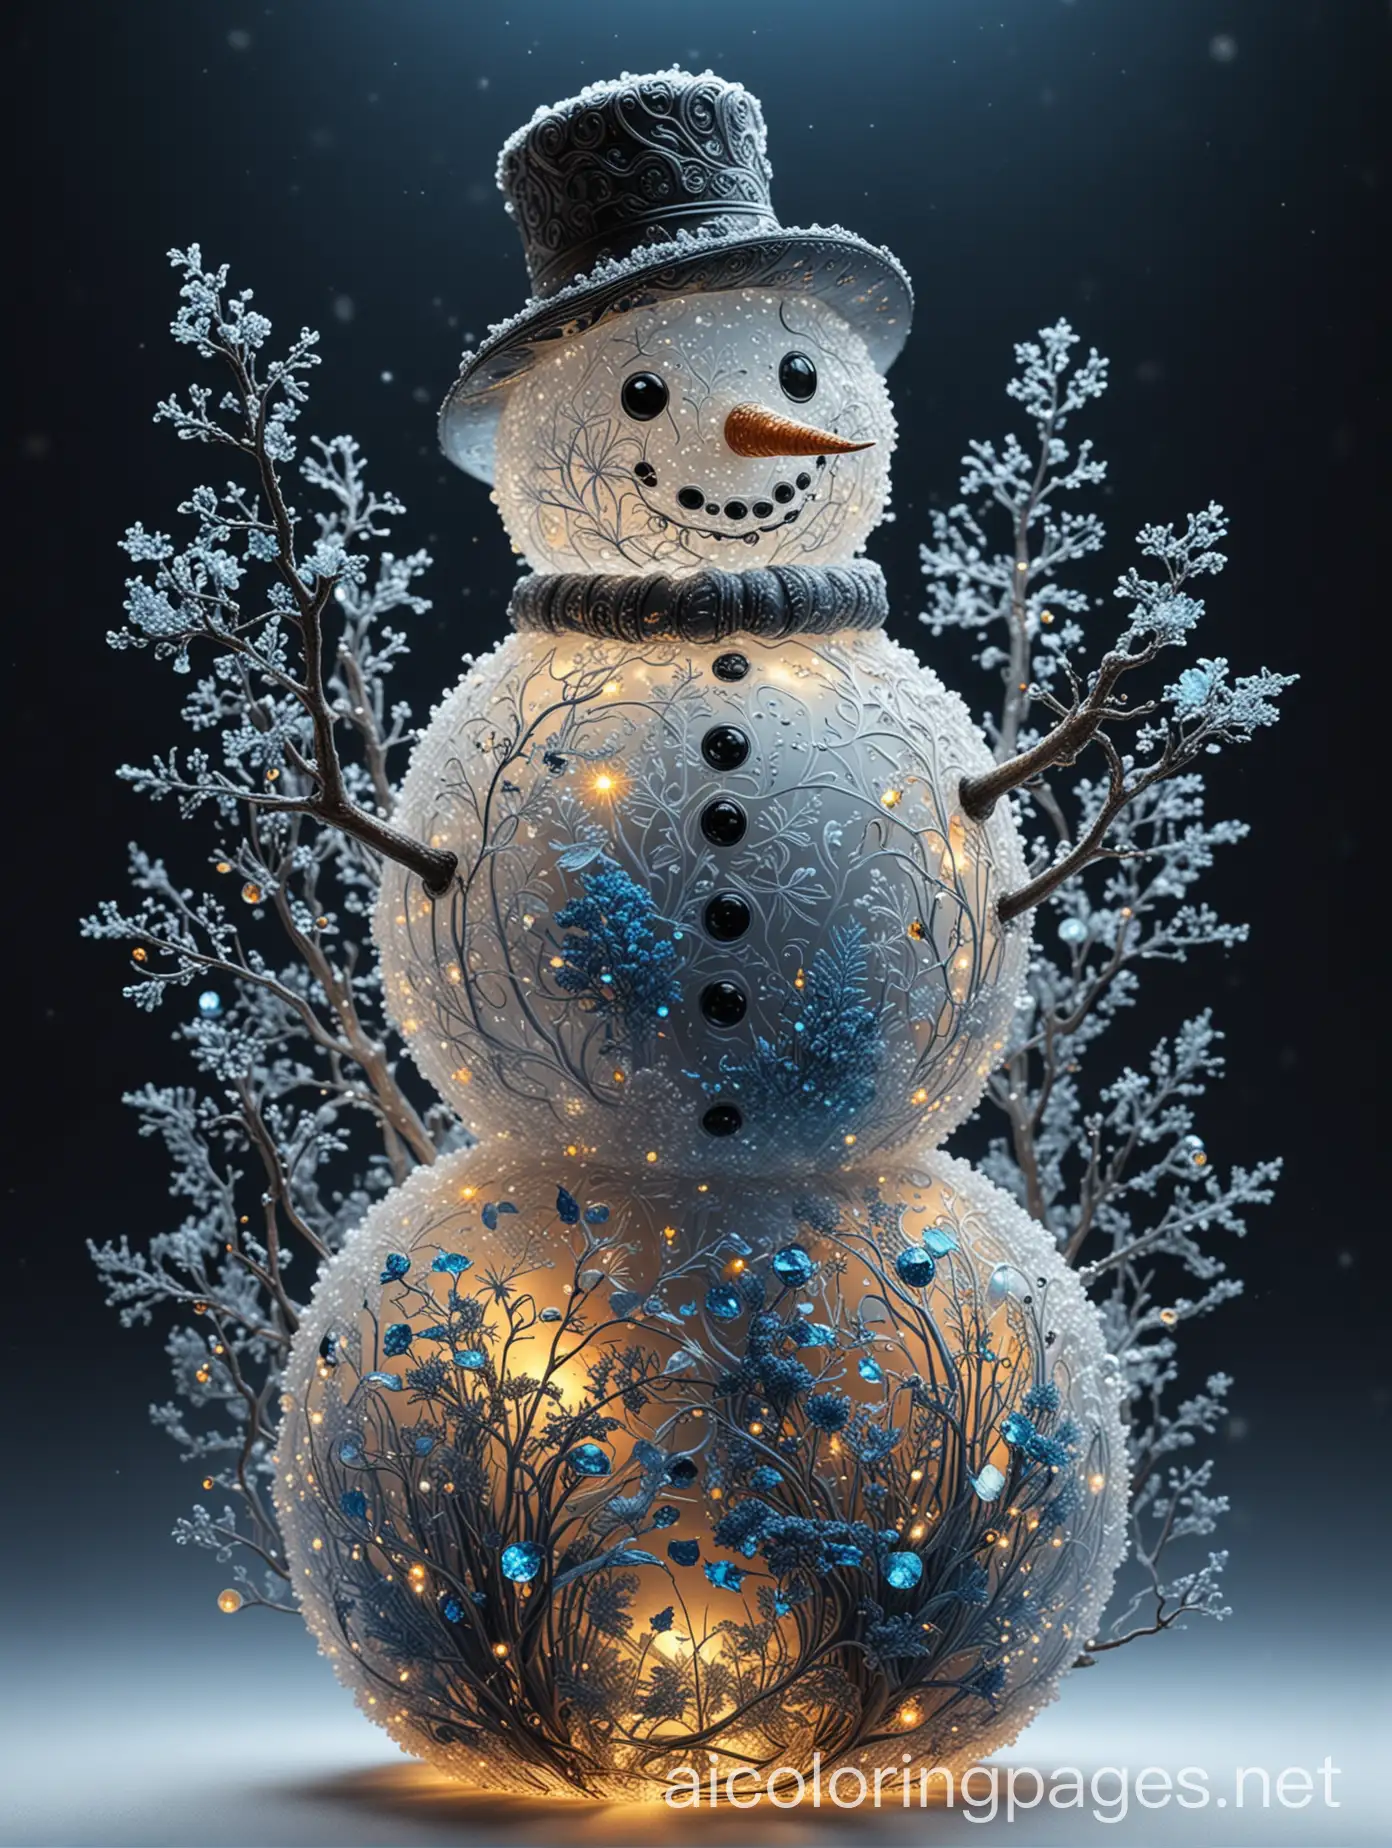 transparent glass snowman filled with bioluminescent plants, : luminous, opalescent, Insanely detailed beautiful snowman  : meticulously detailed filigree  extreme contrast and saturation : starry galactic night sky background : magical fantasy artwork : ultra high quality : dramatic lighting : extreme contrast : rule of thirds : HDR : photorealistic : florescent light, Coloring Page, black and white, line art, white background, Simplicity, Ample White Space. The background of the coloring page is plain white to make it easy for young children to color within the lines. The outlines of all the subjects are easy to distinguish, making it simple for kids to color without too much difficulty